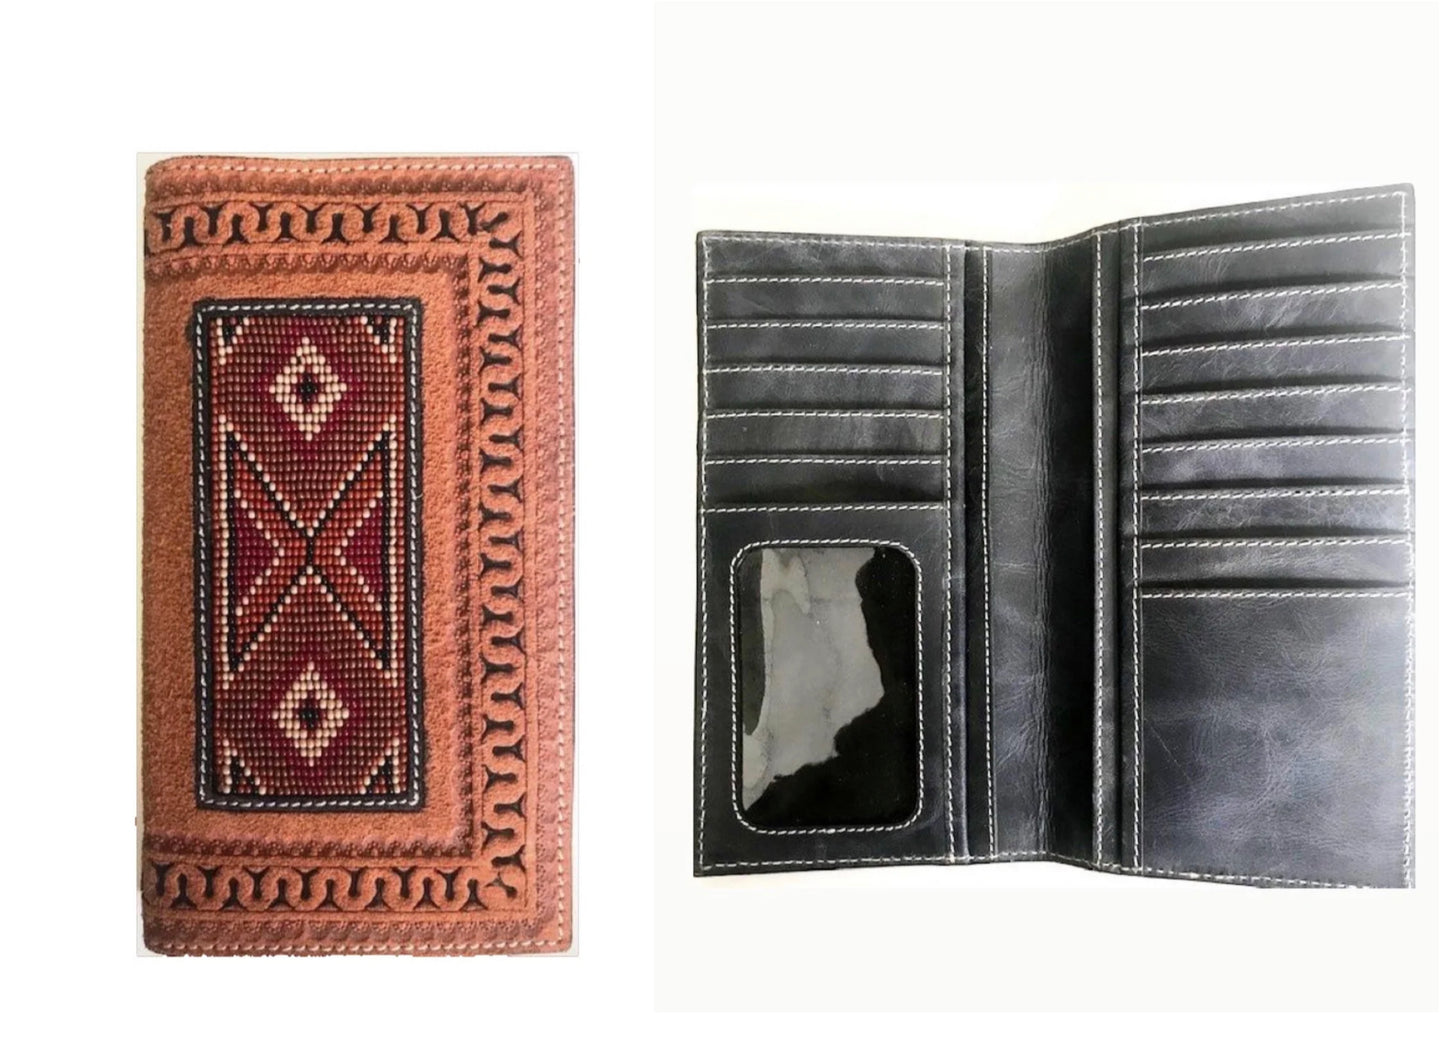 TWISTED X RODEO WALLET, LEATHER, EARTH TONE BEADING INSET